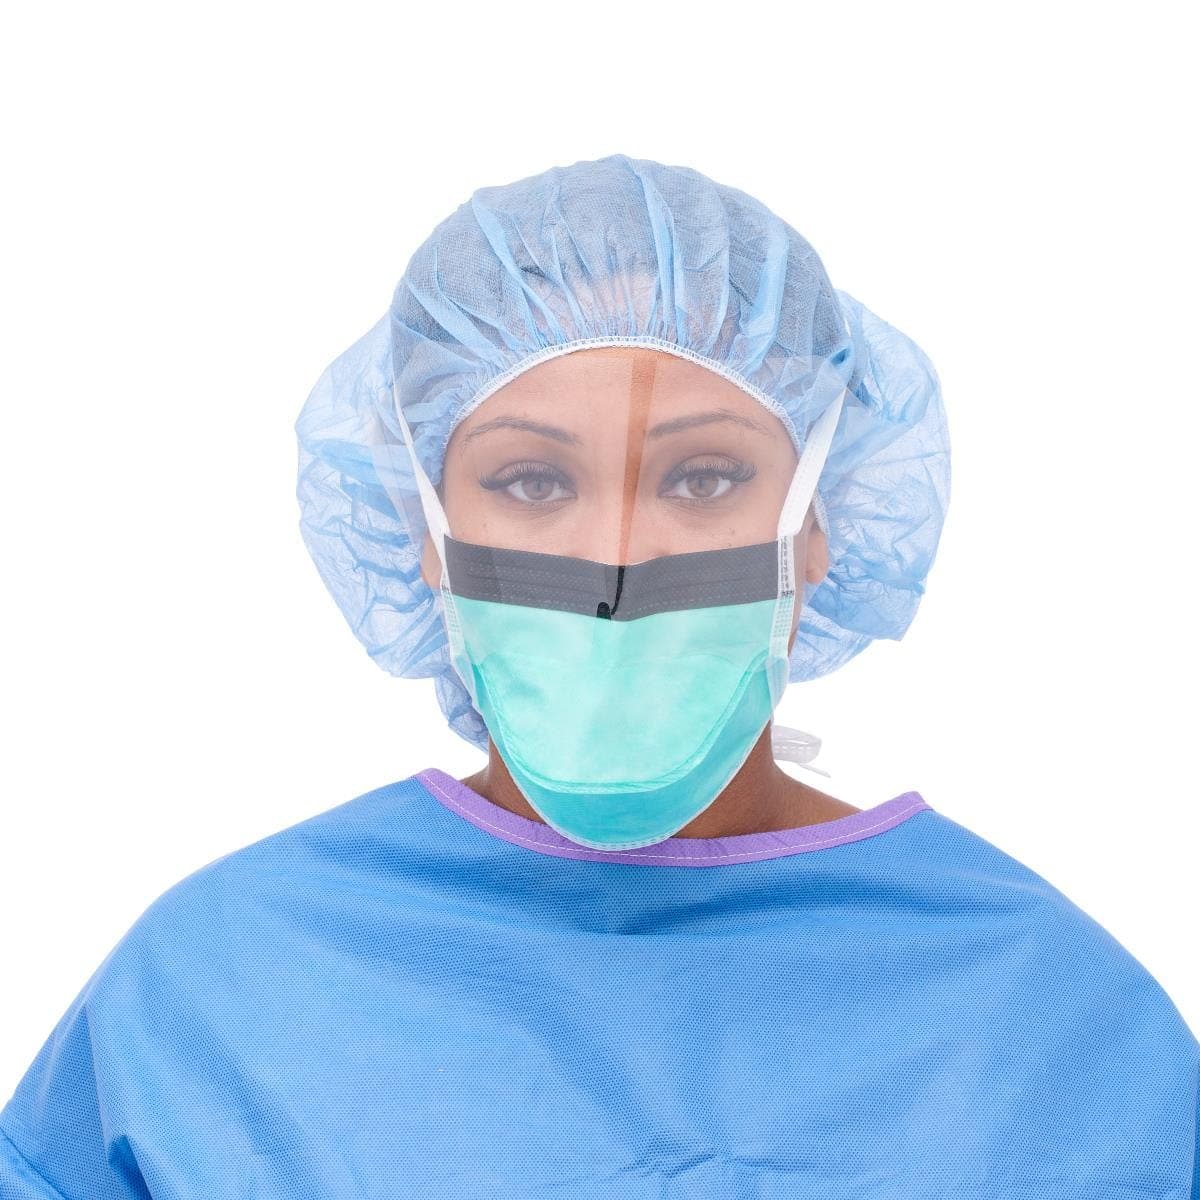 Medline Medline Duckbill-Style Surgical Face Mask with Eye Shield and Ties